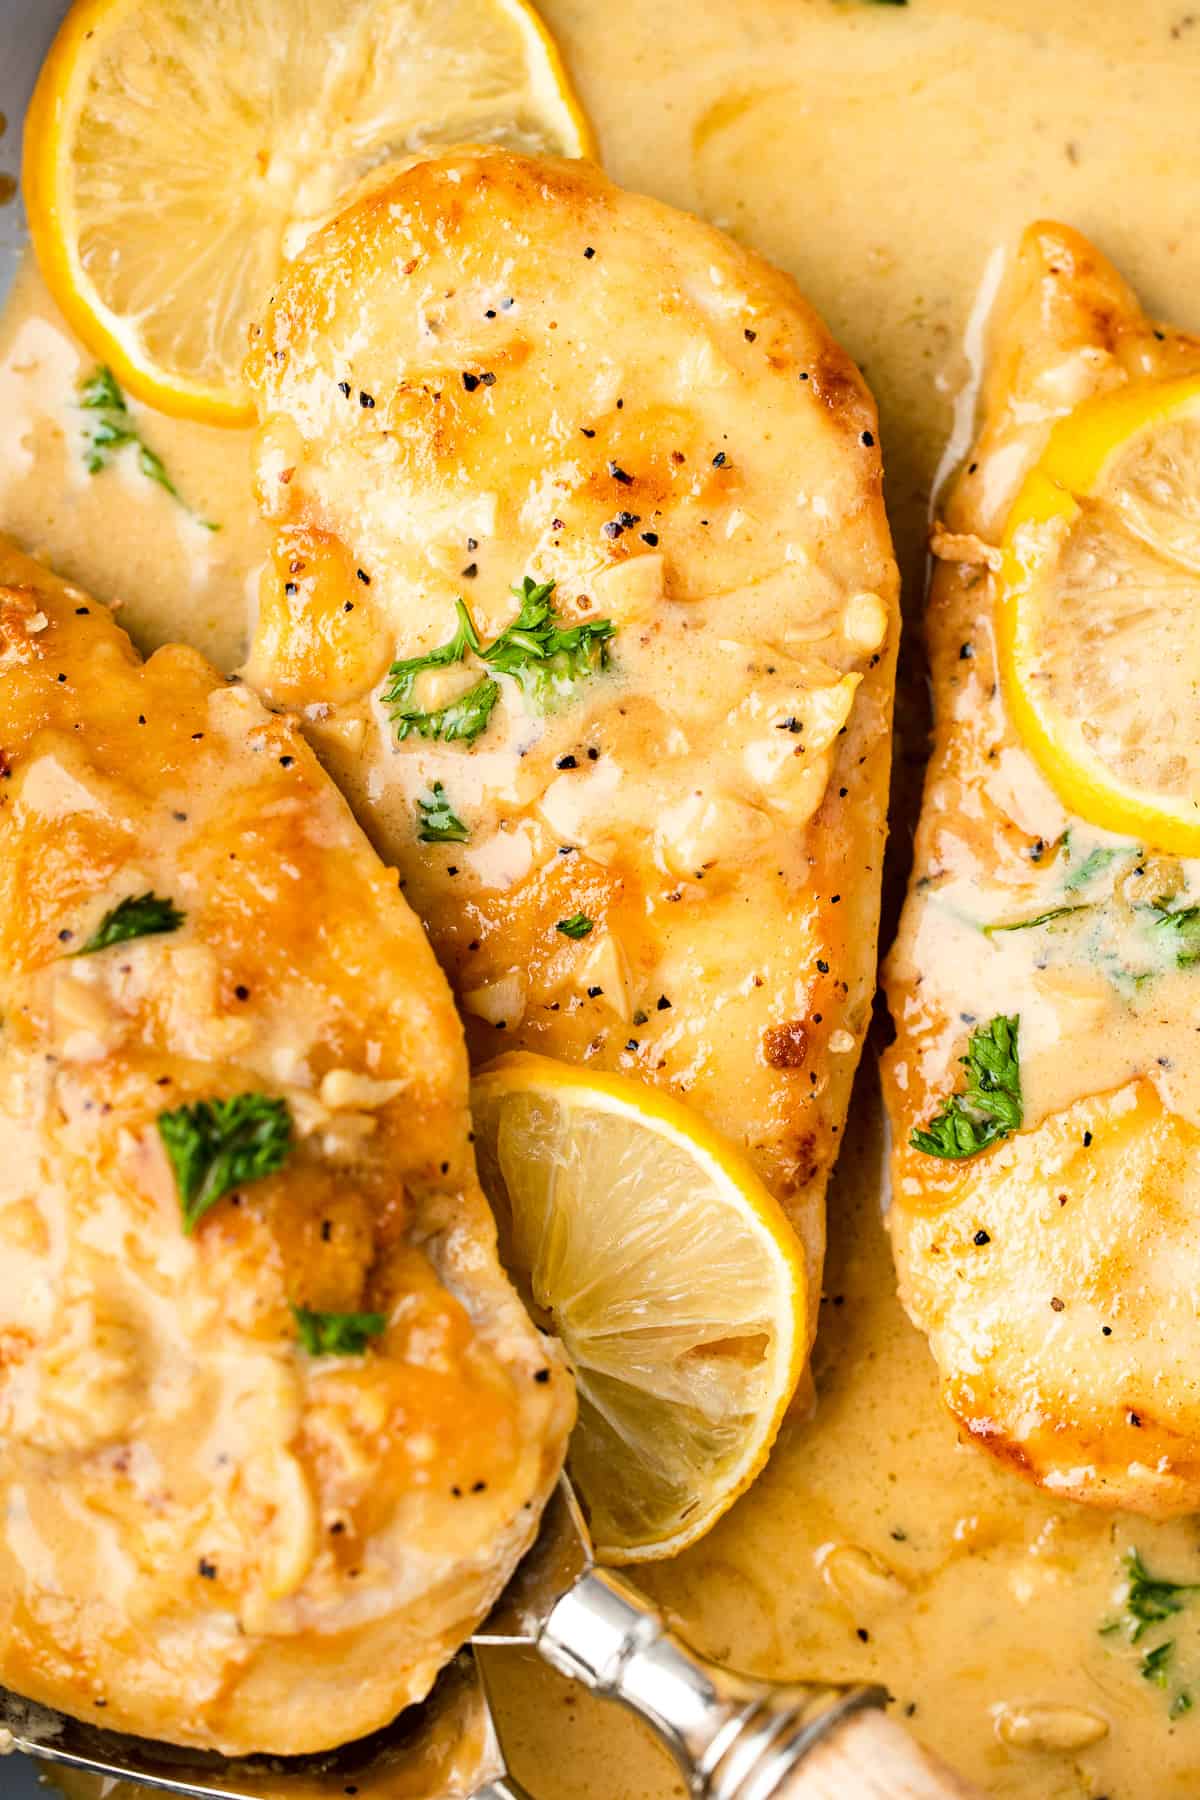 Chicken breasts in lemon sauce, garnished with fresh lemon and parsley.